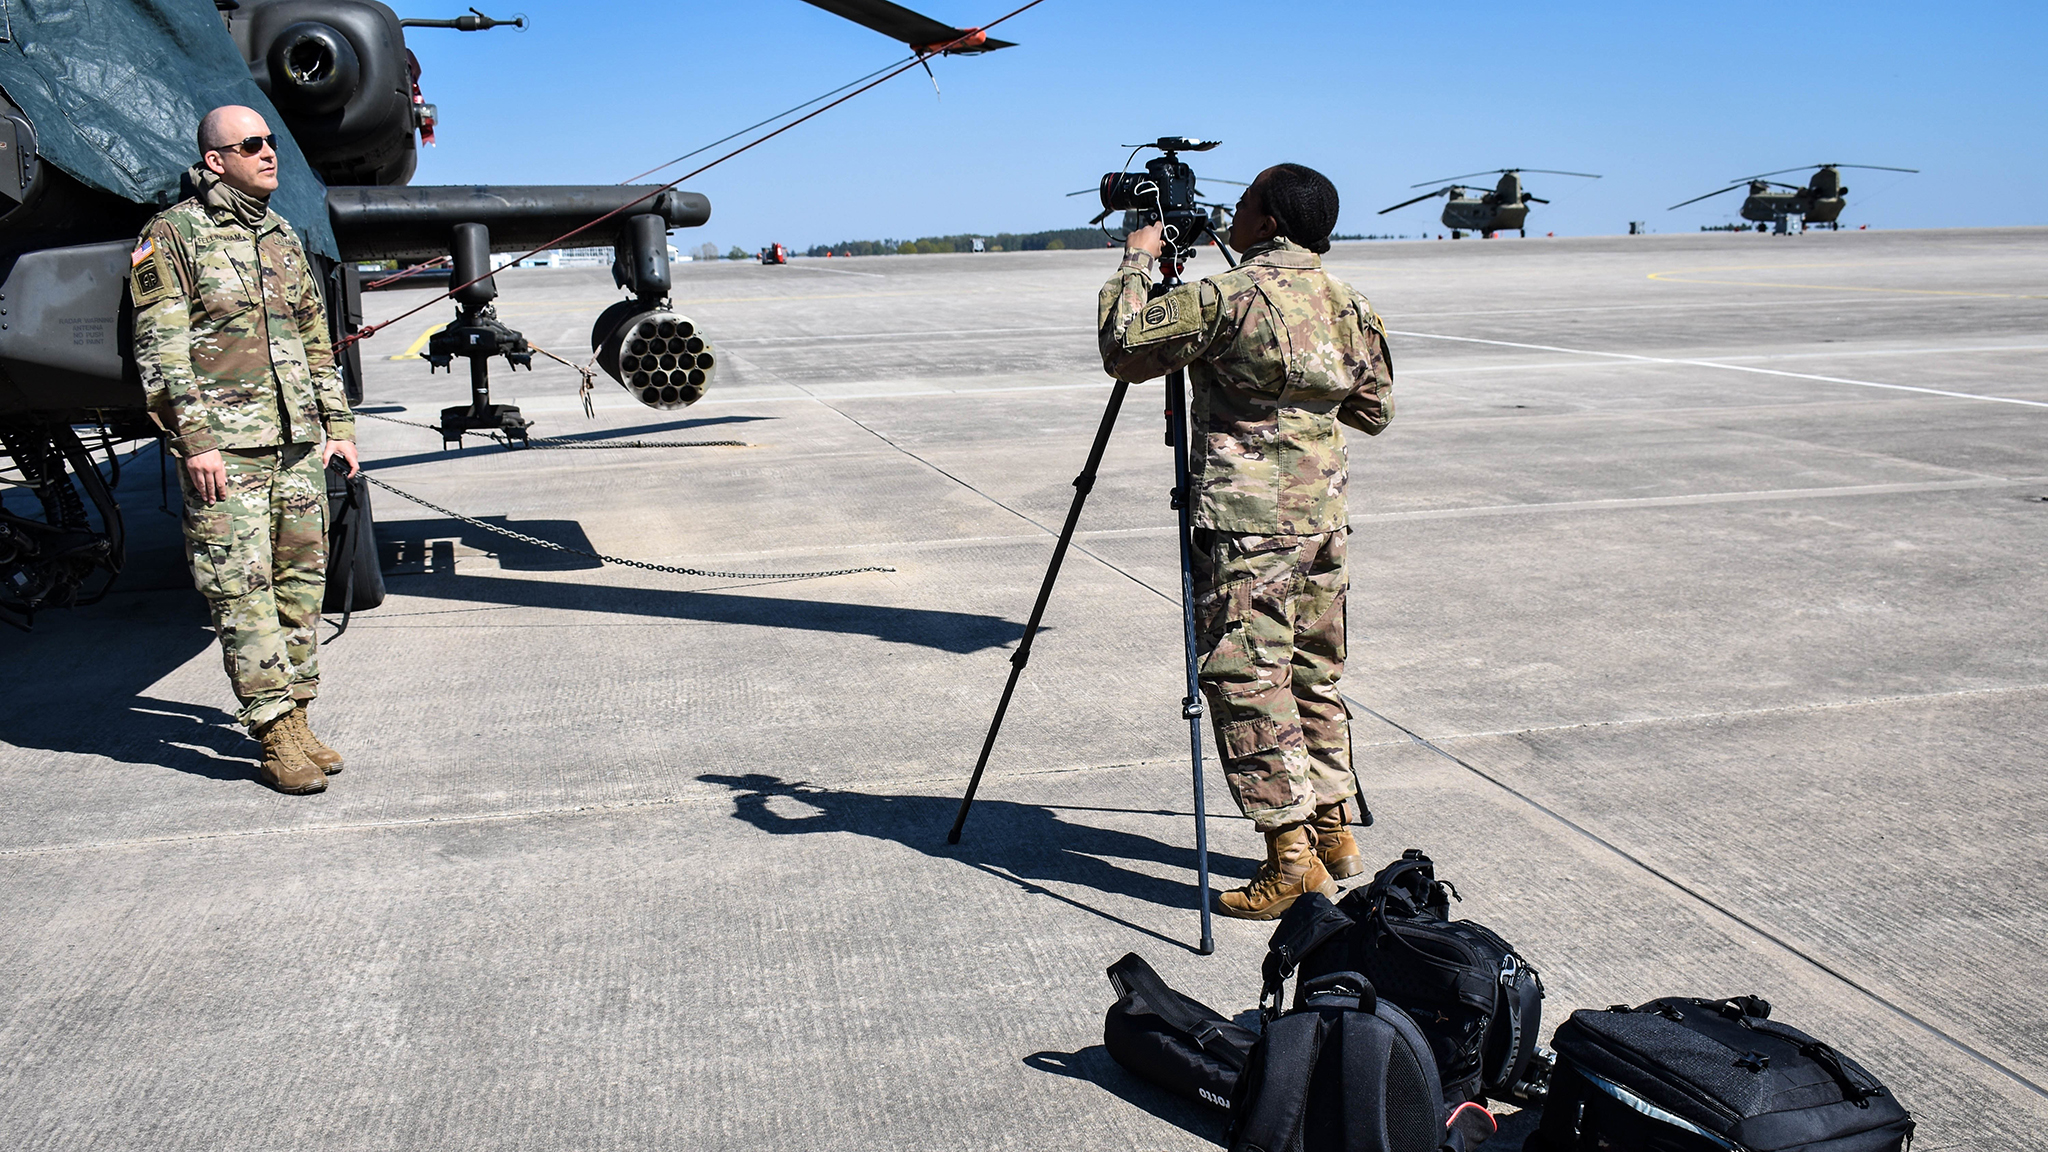 49th Pad Brings Skillset Helps Fulfill Mission In Usag Ansbach